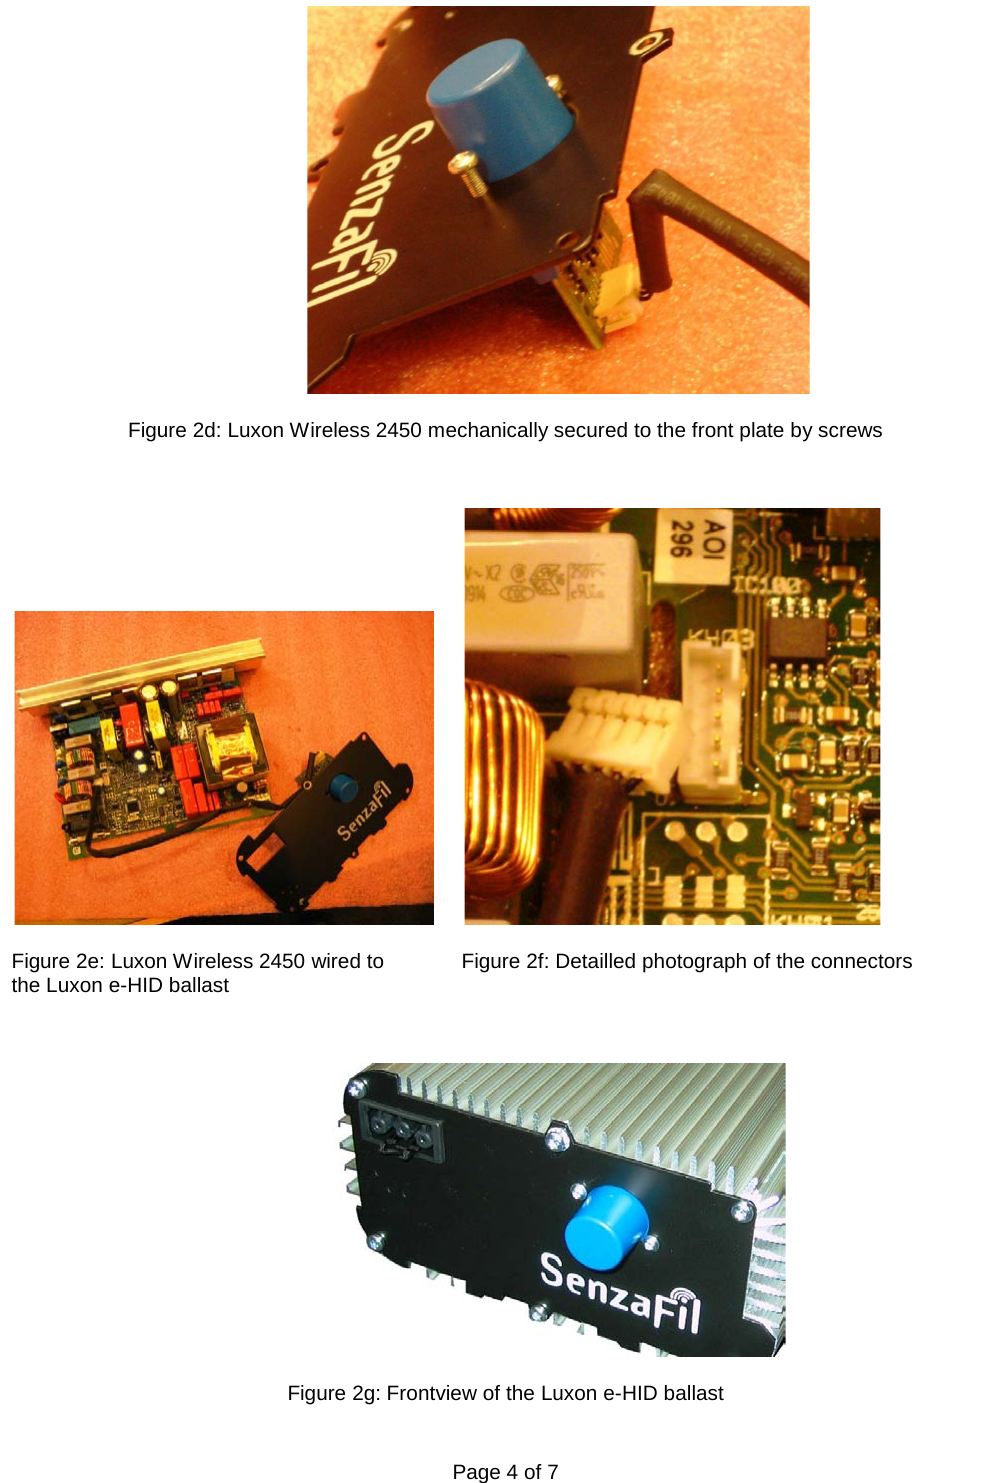   Page 4 of 7      Figure 2d: Luxon Wireless 2450 mechanically secured to the front plate by screws      Figure 2e: Luxon Wireless 2450 wired to  Figure 2f: Detailled photograph of the connectors the Luxon e-HID ballast     Figure 2g: Frontview of the Luxon e-HID ballast  